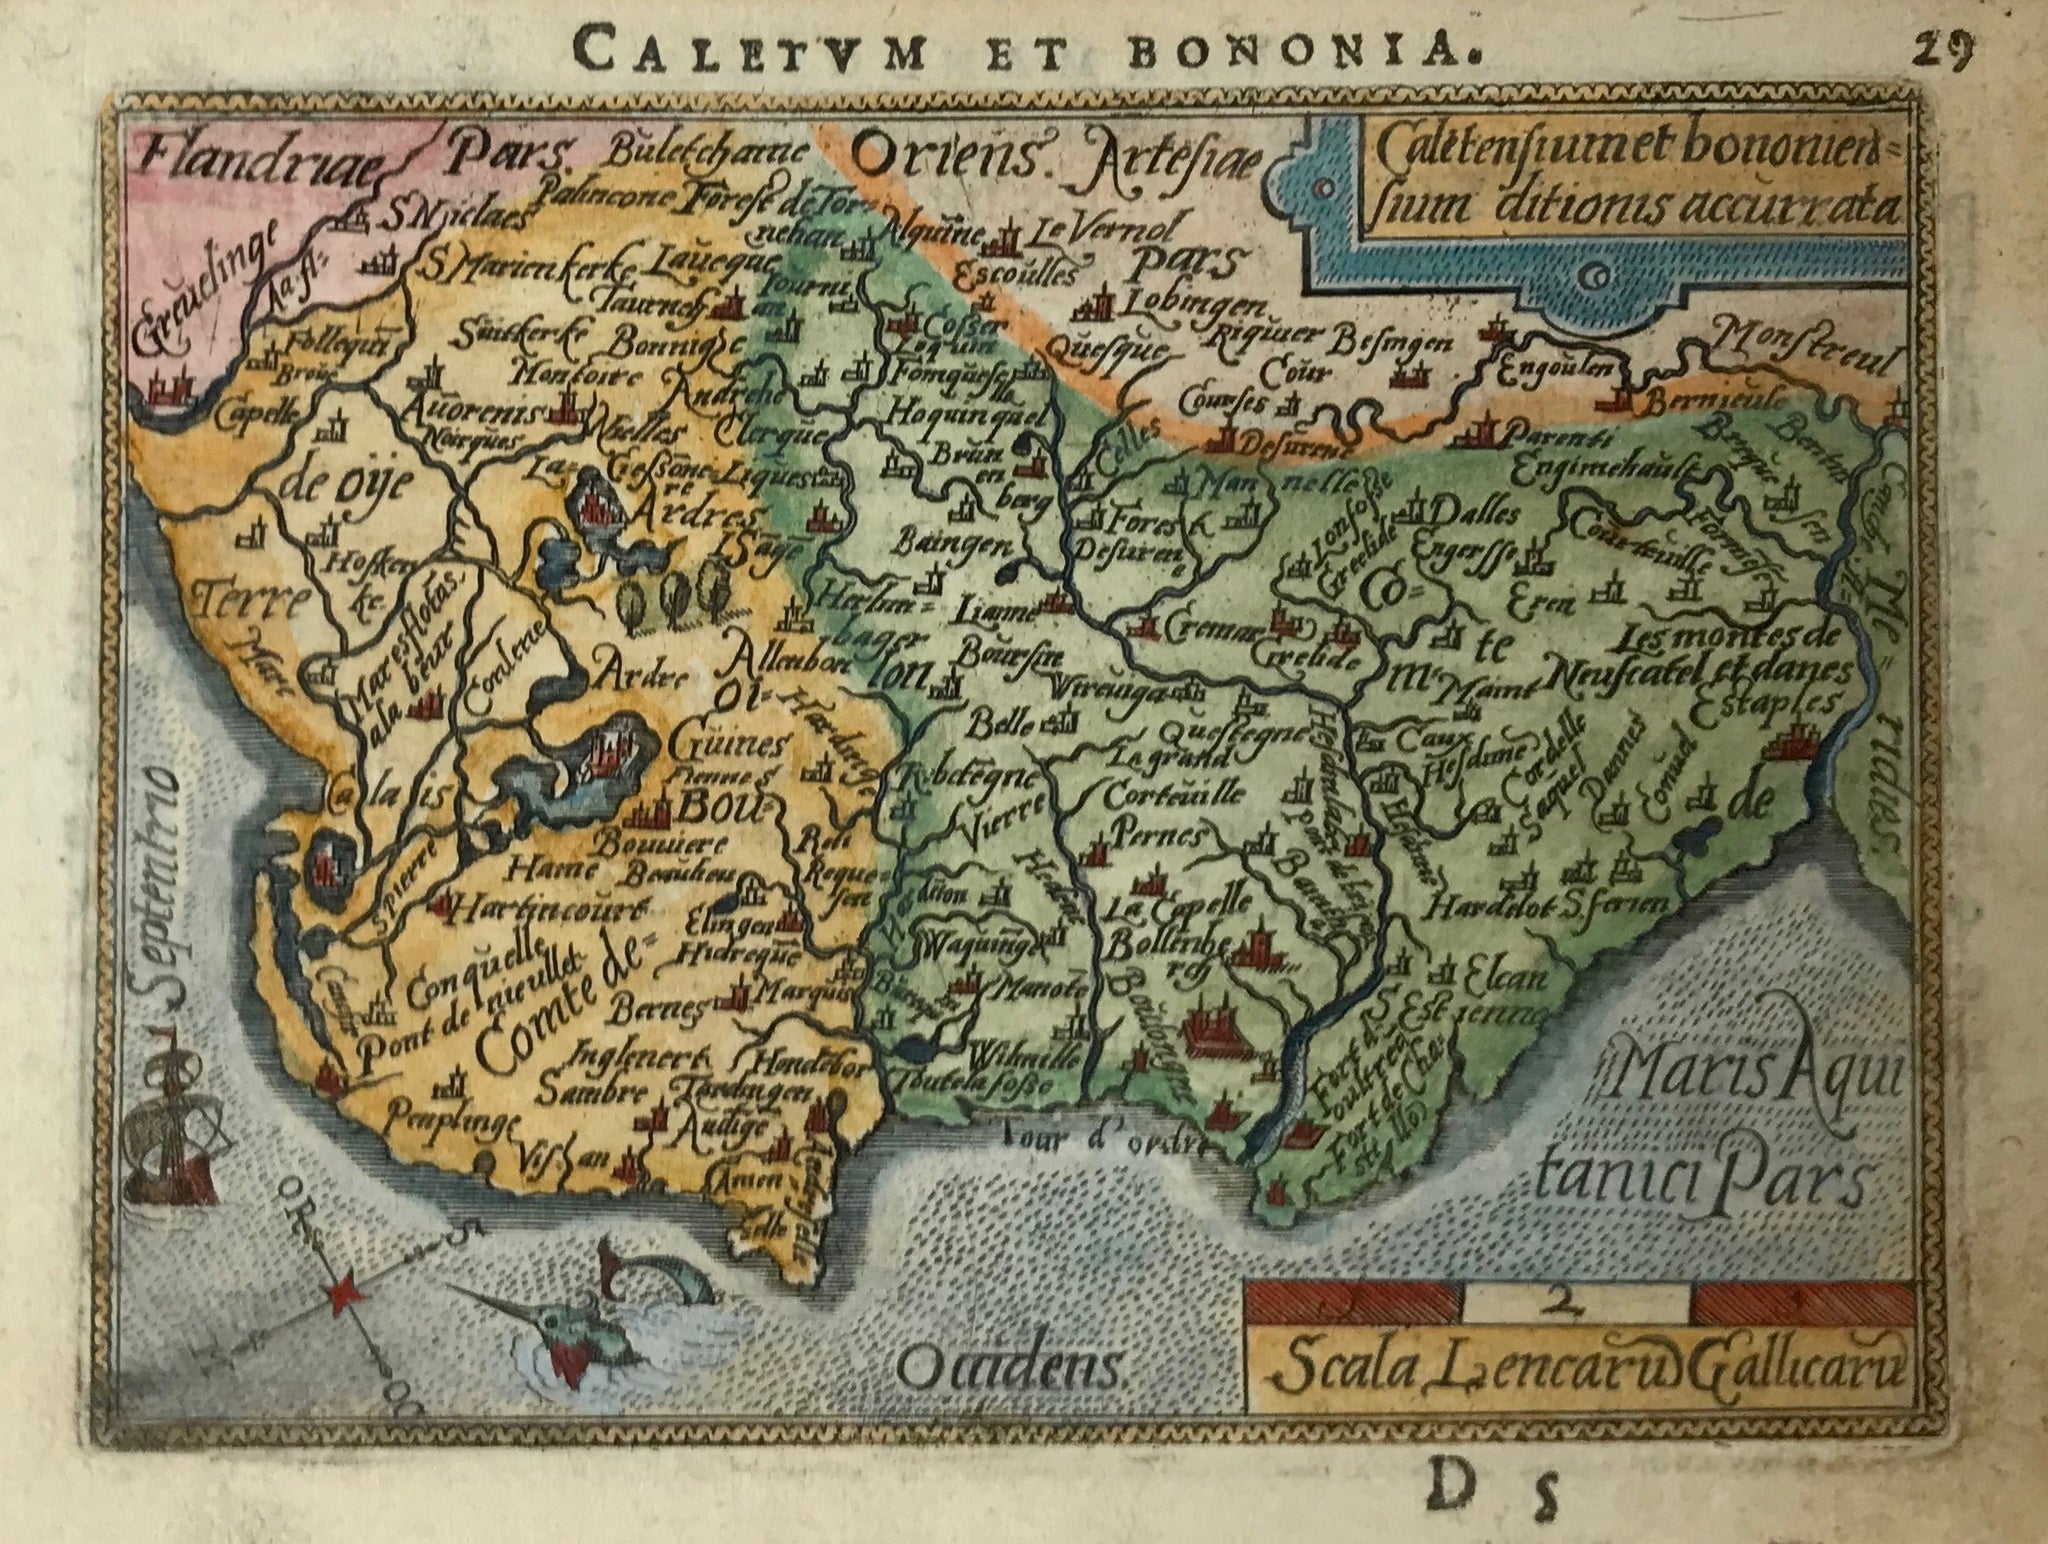 "Caletum et Bononia". Copper etching in modern coloring from the pocket atlas by A. Ortelius. Antwerp, ca 1580.  This map is east oriented. (East is at the top, north on the left side.) In the upper left is a bit of Flanders. Near the decorative sailing vessel in the lower left is Calais. At the top of the map is La Vernol and Lobingen. On the backside is text in French about the region of Vermandois.